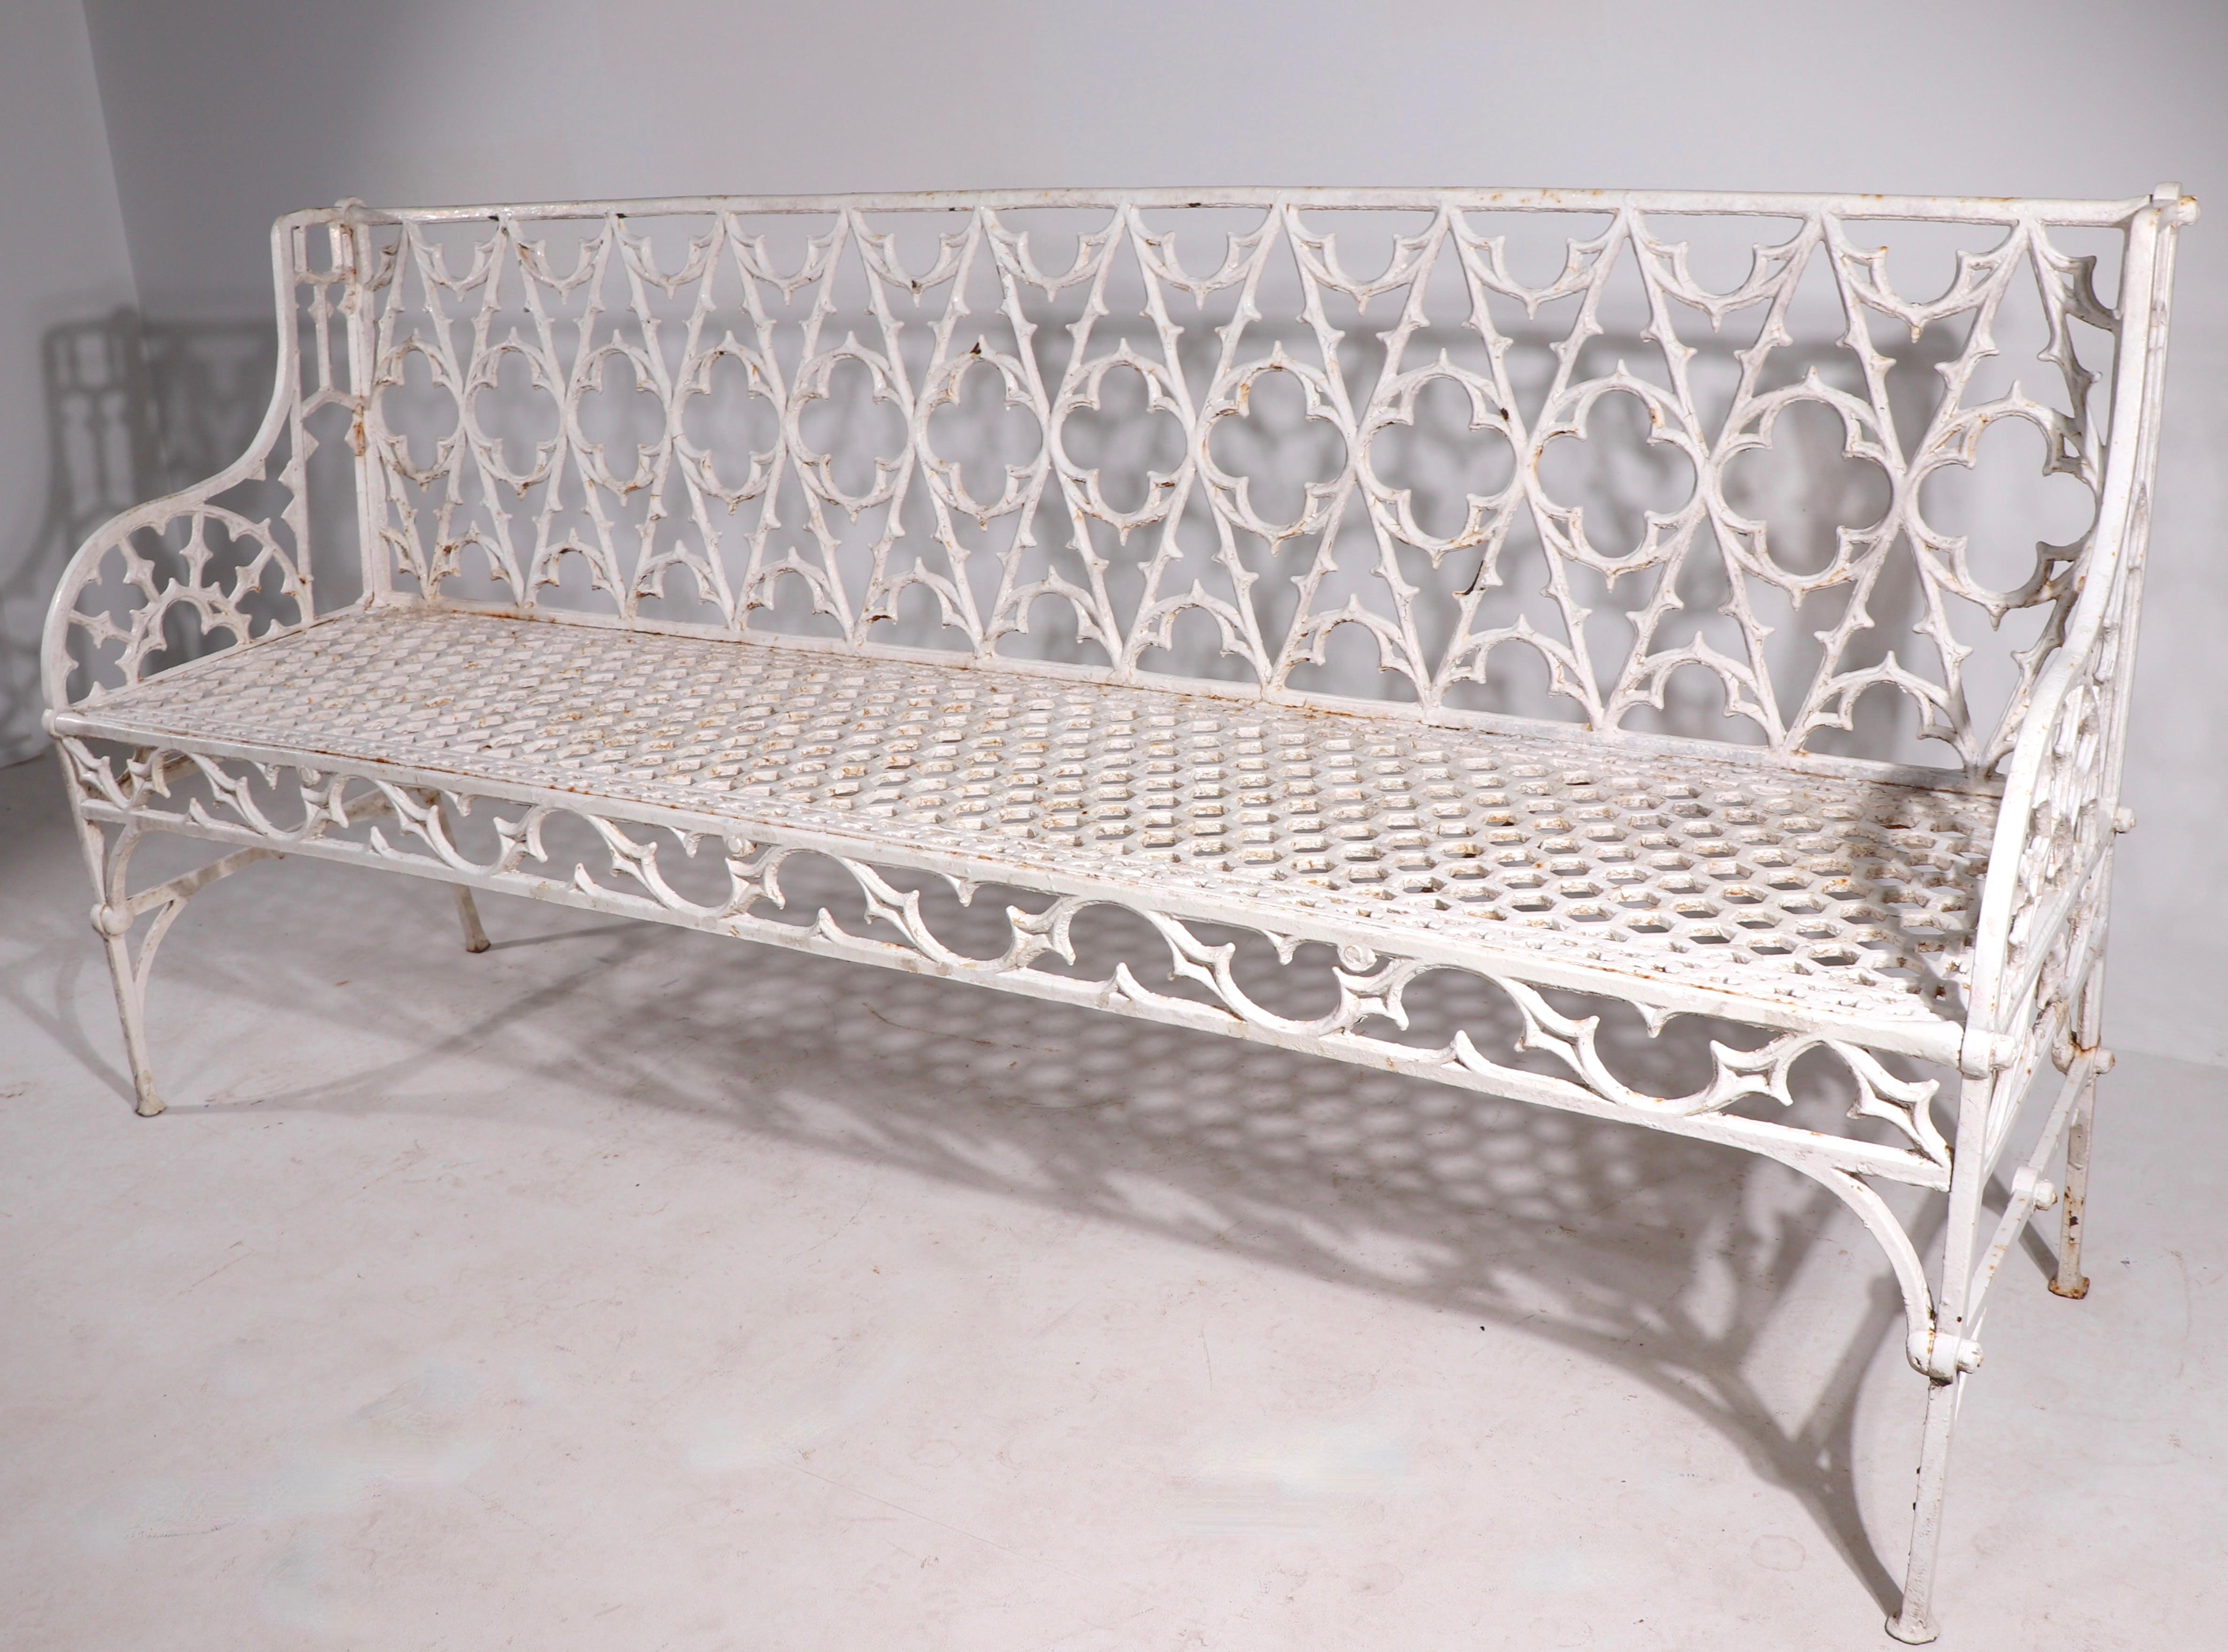 Large scale cast iron bench attributed to English maker Coalbrookedale, unsigned. This example is in very fine, original condition, free of breaks, or repairs. Highly unusual to find this size, this bench may have been a custom or special order